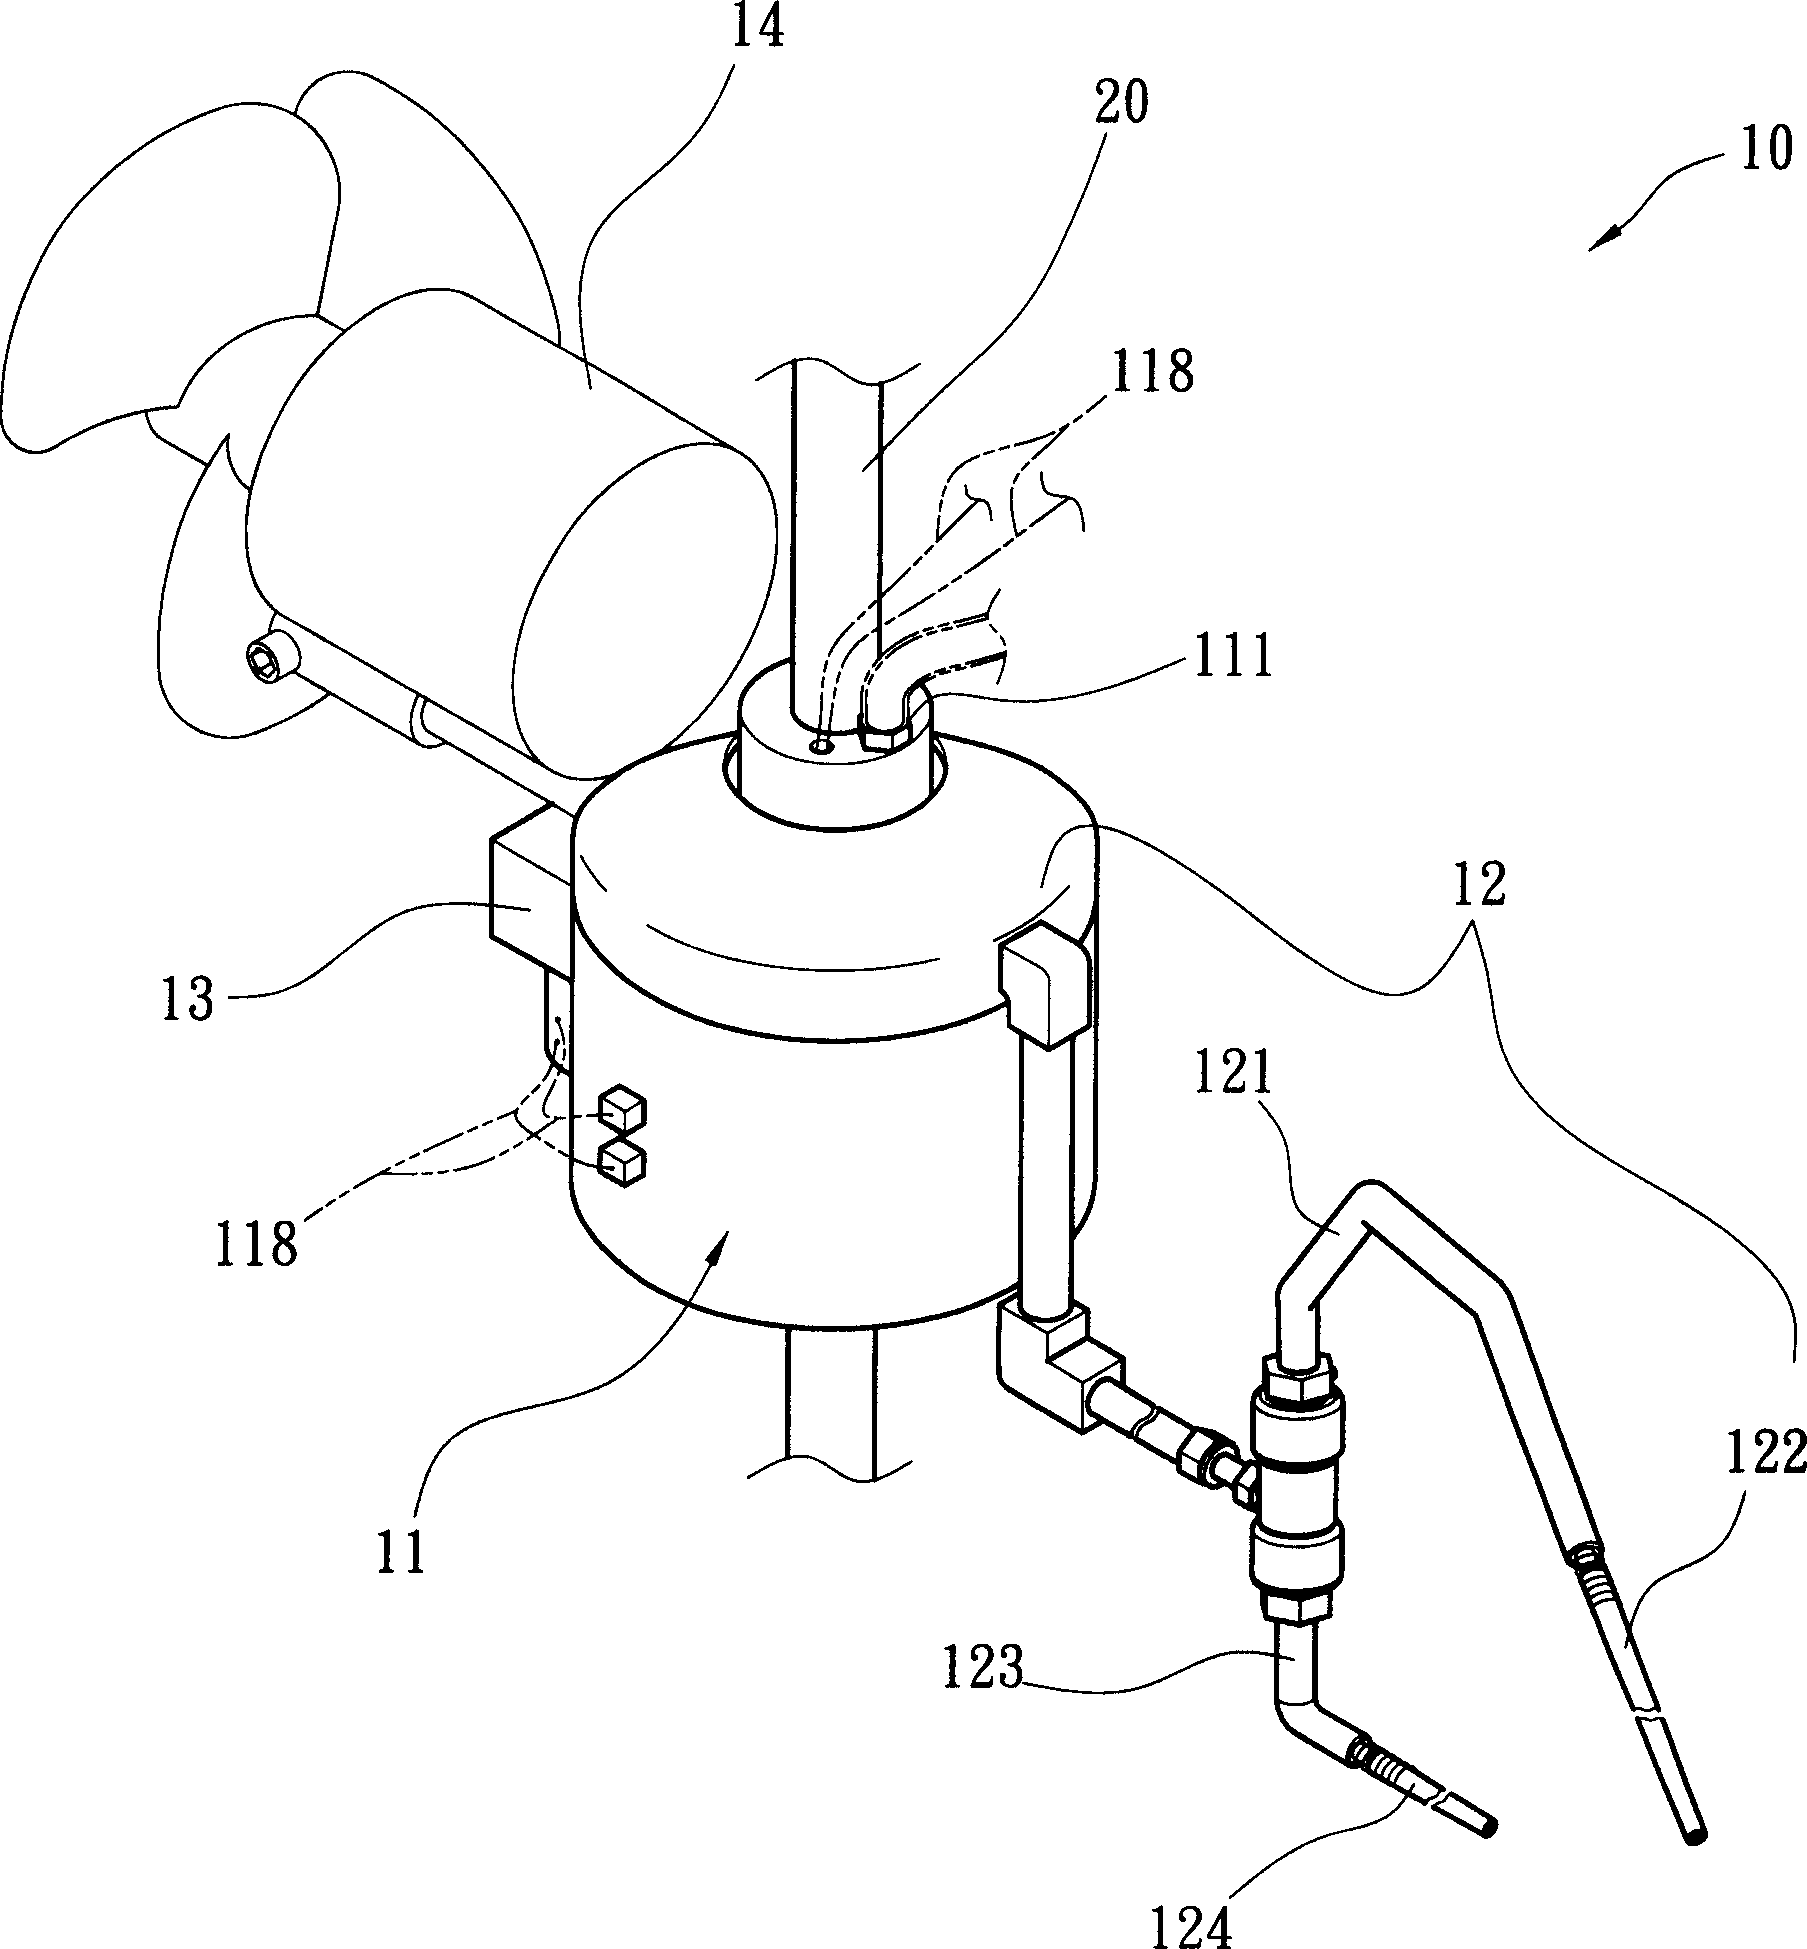 Flock blowing and heat radiation system for one-side circular knitting machine